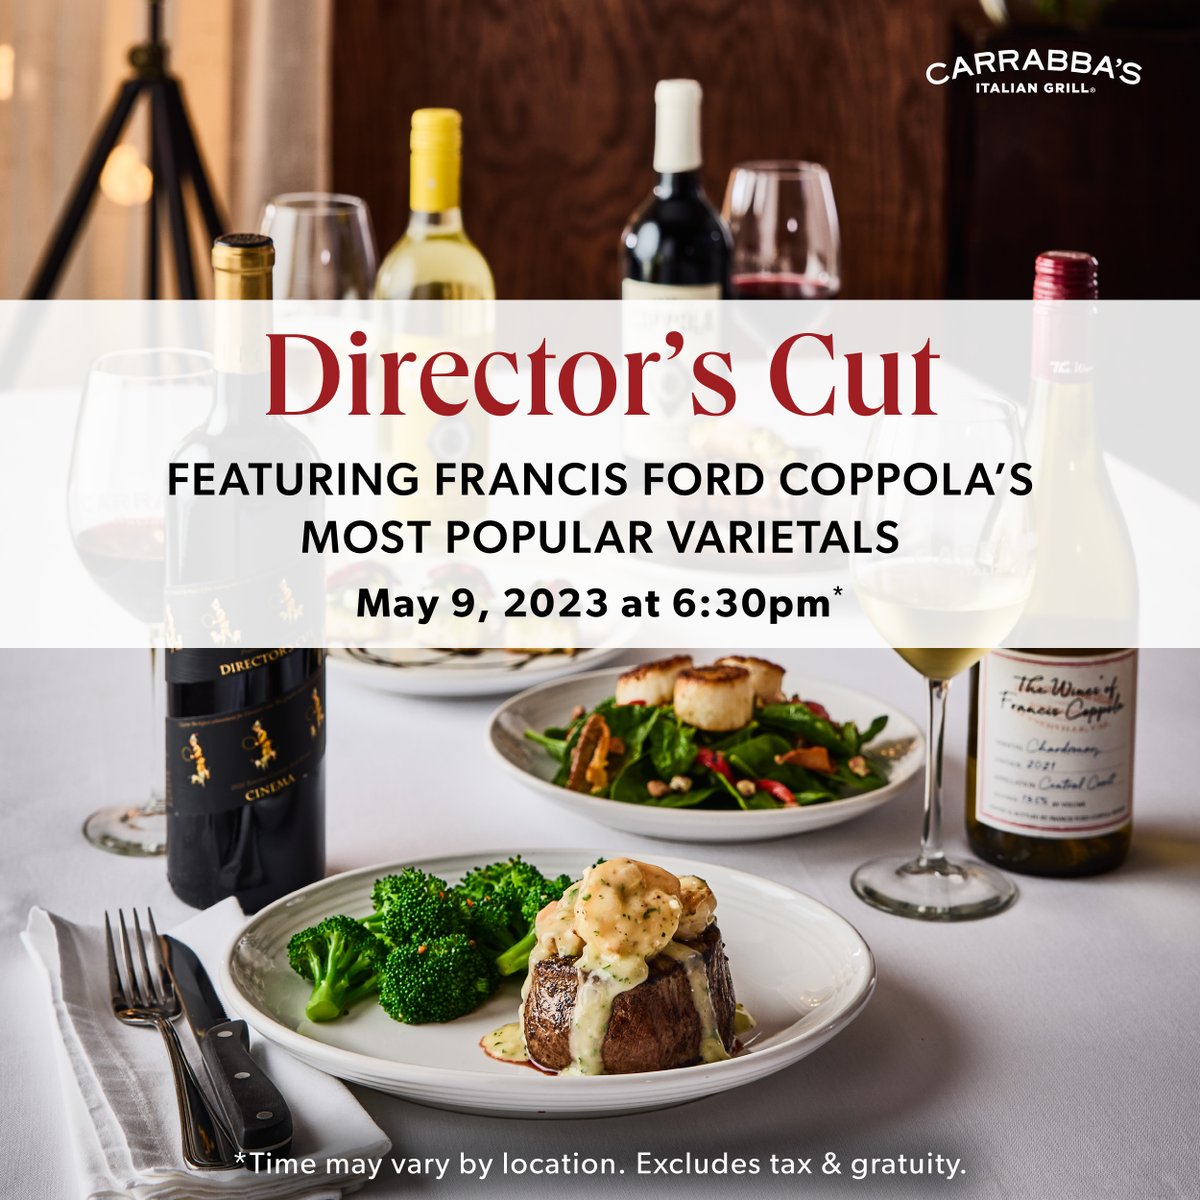 Lights, Camera, Action! 🎥 Join us at our May 9 Director's Cut Wine Dinner featuring a four-course wine dinner showcasing Francis Ford Coppola's most popular wines paired with our chef-crafted menu. RSVP to your Carrabba's today at carrabbas.com/winedinner. #CarrabbasWineDinner